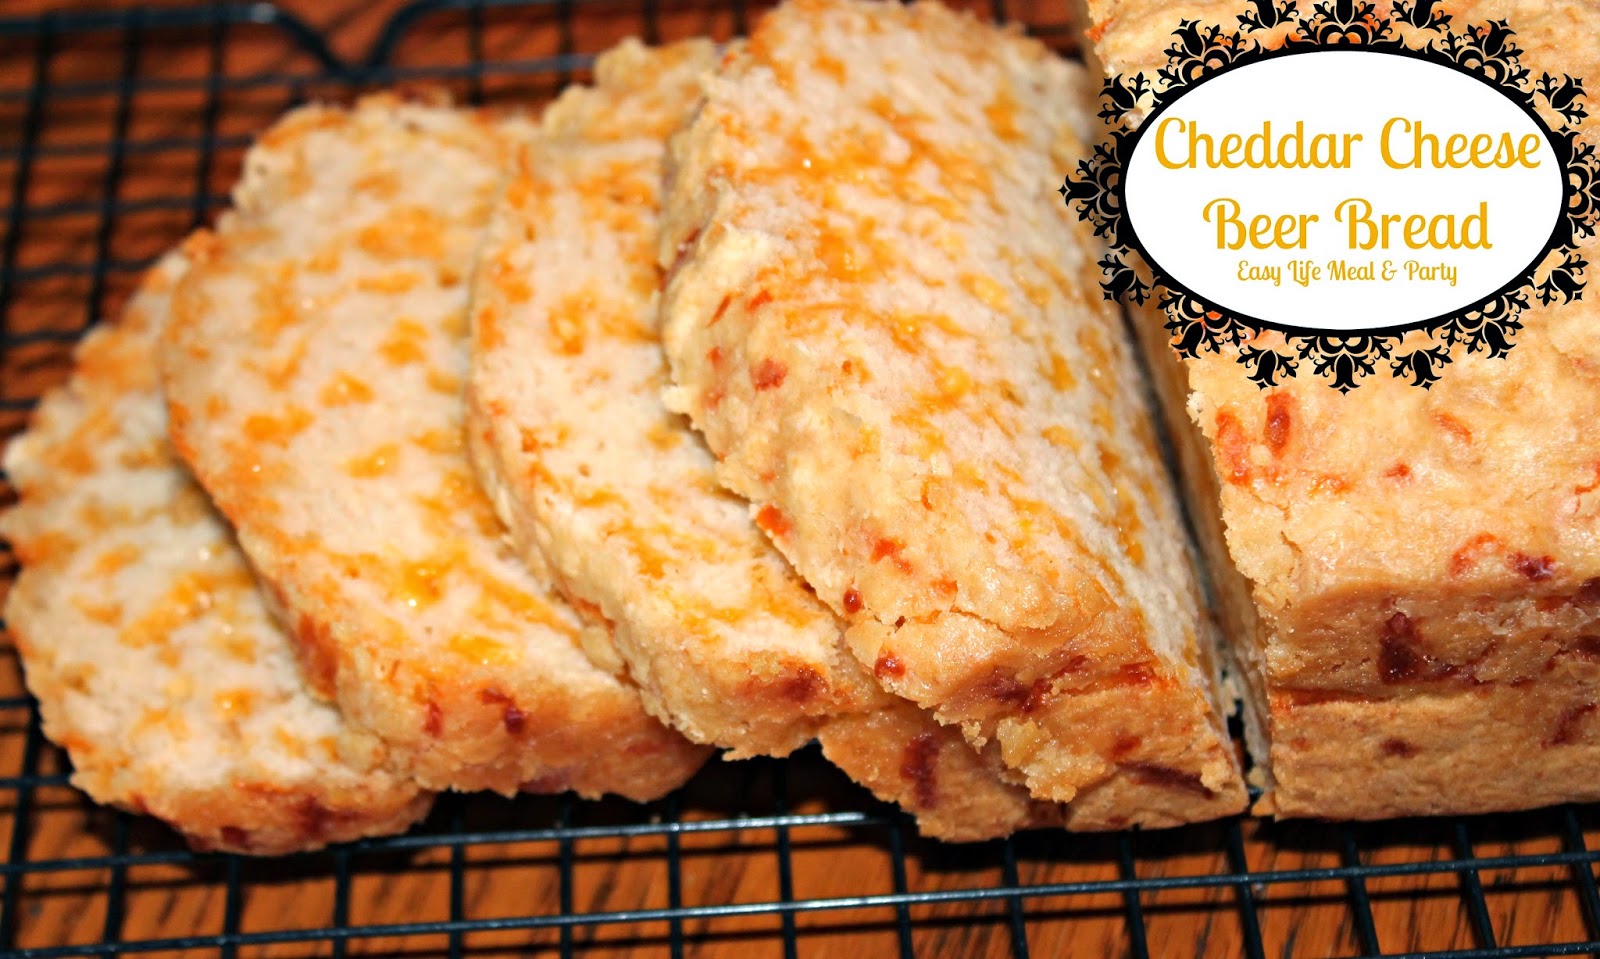 Ceddar Cheese Beer Bread - Easy Life Meal & Party Planning - This is the easiest bread in the world to make and it is so melt in your mouth good!